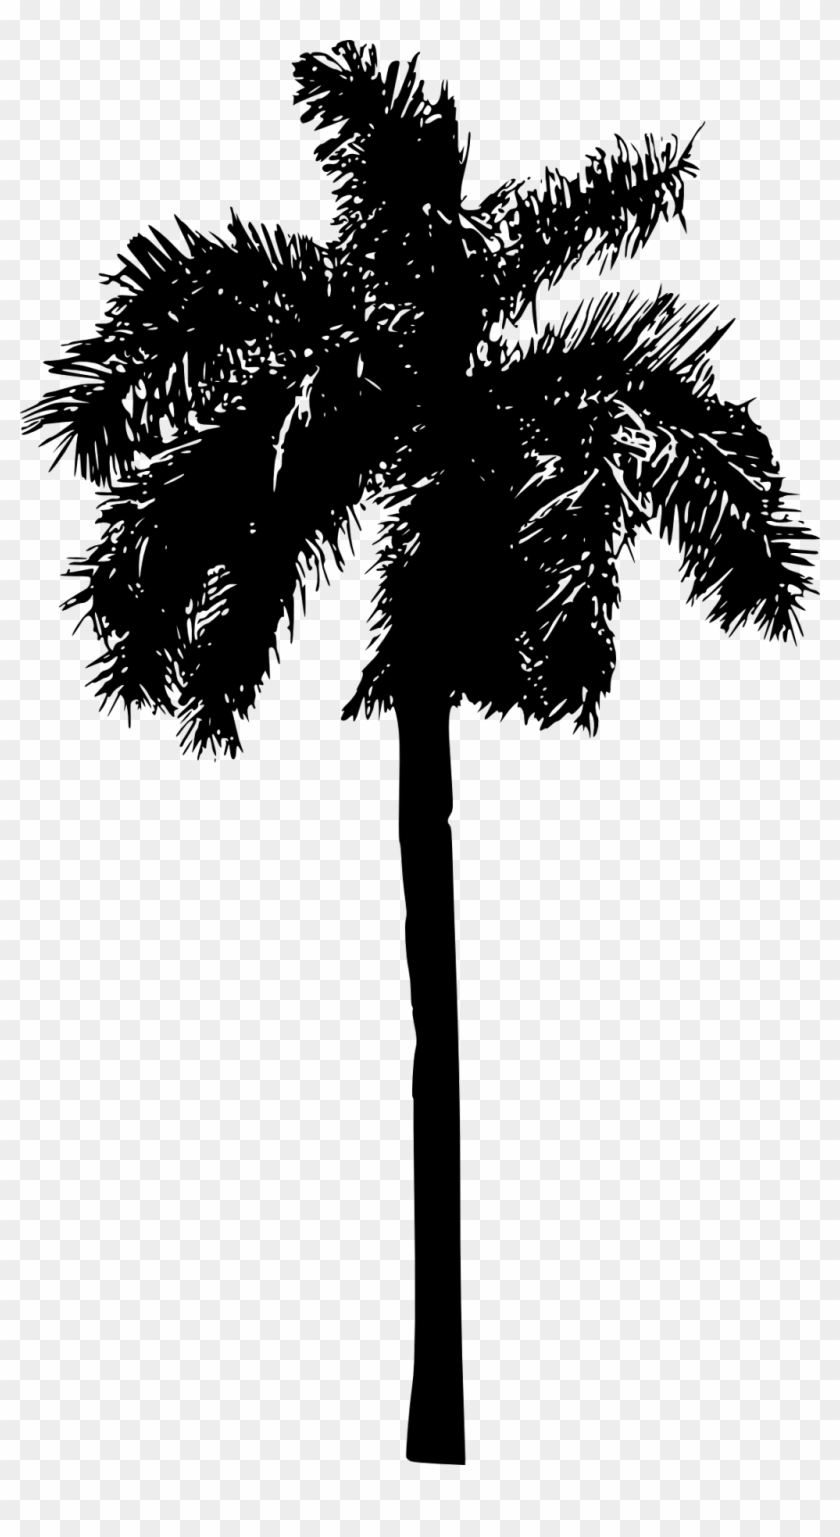 Report Abuse - Palm Tree Silhouette Png #959492